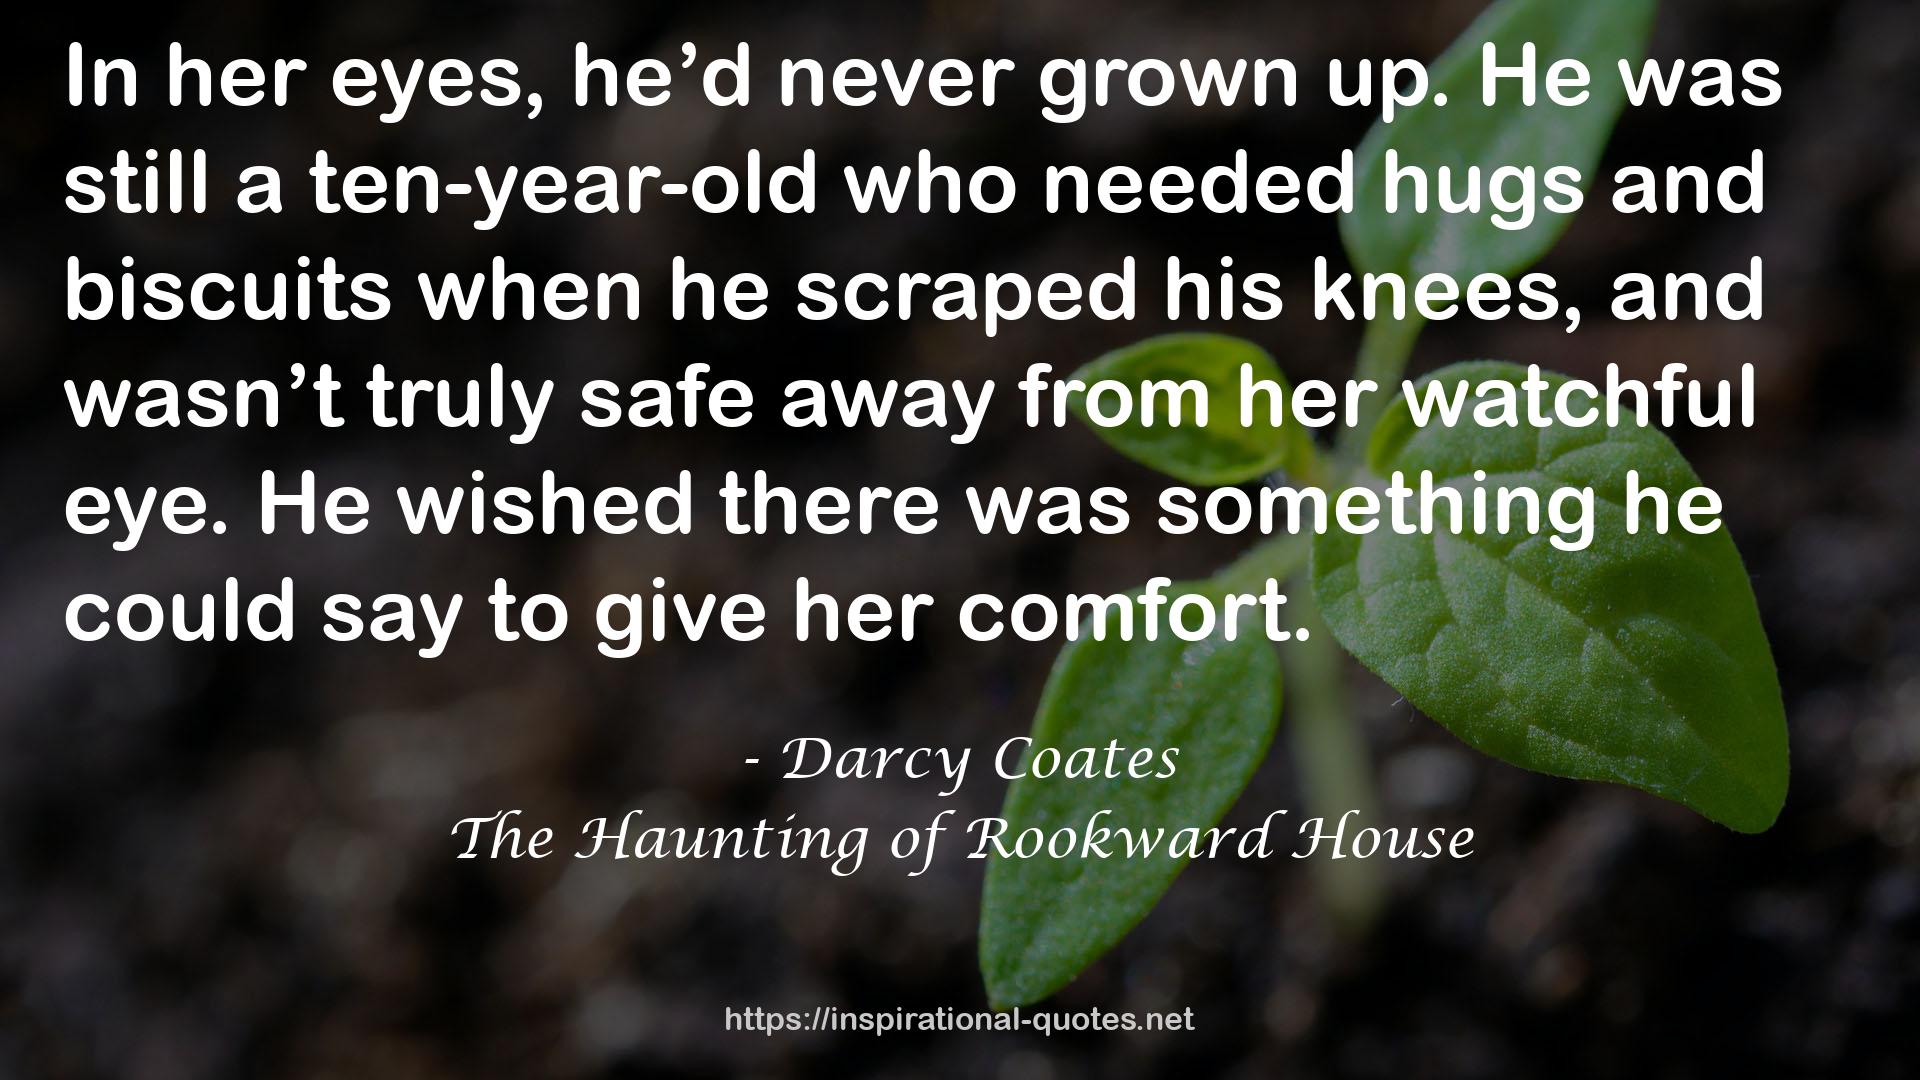 The Haunting of Rookward House QUOTES